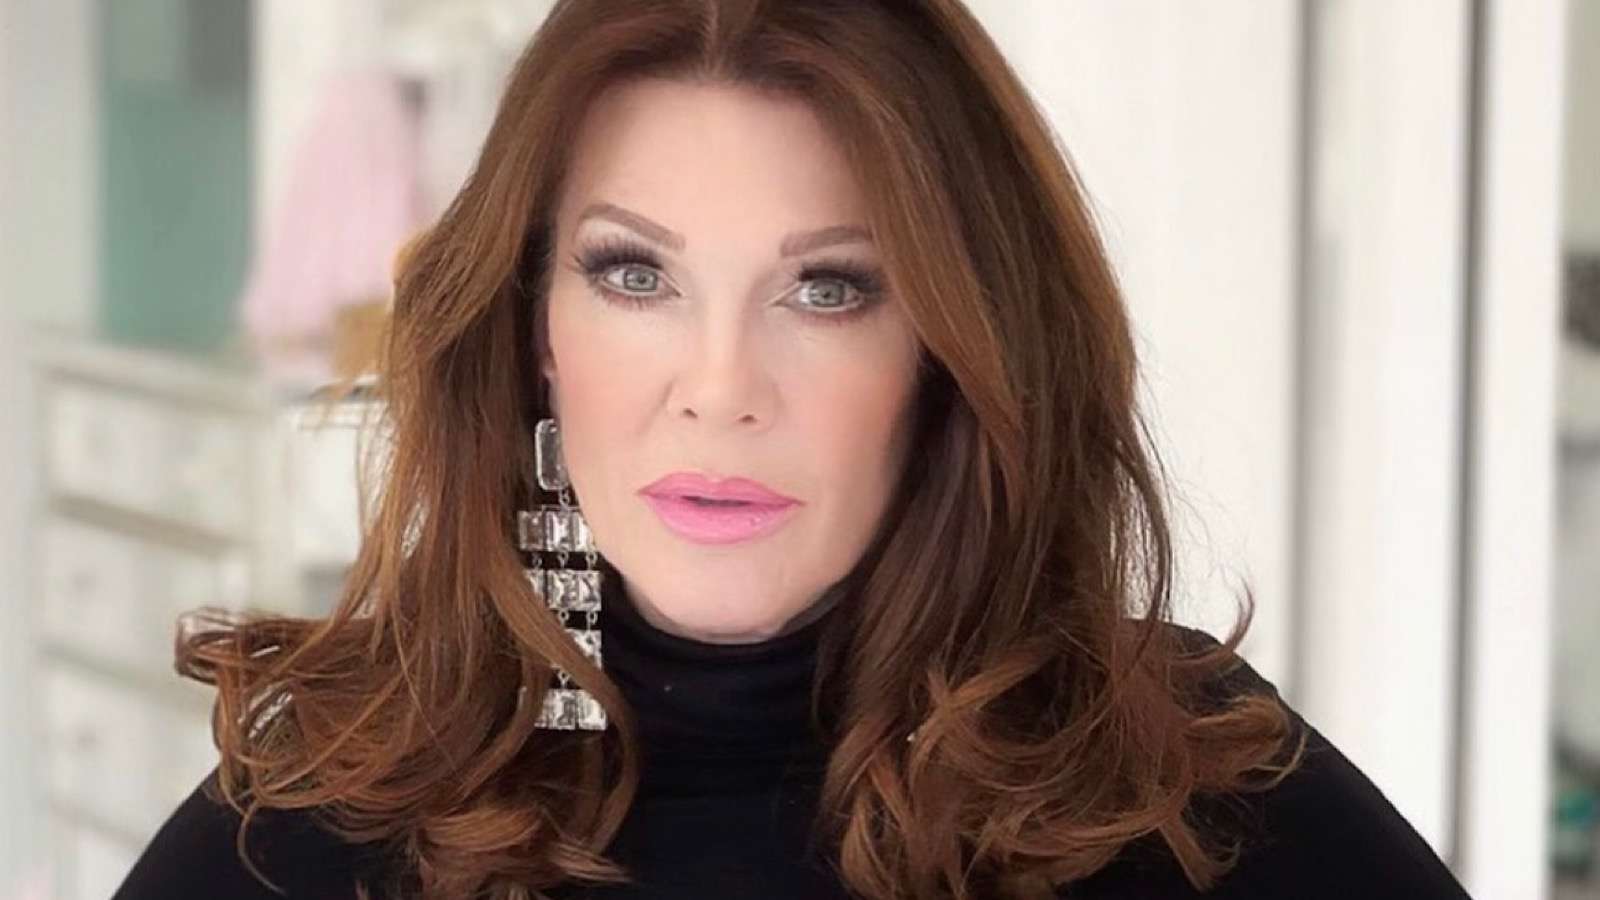 Lisa Vanderpump disagrees with Bethenny Frankel's call to unionize reality TV.